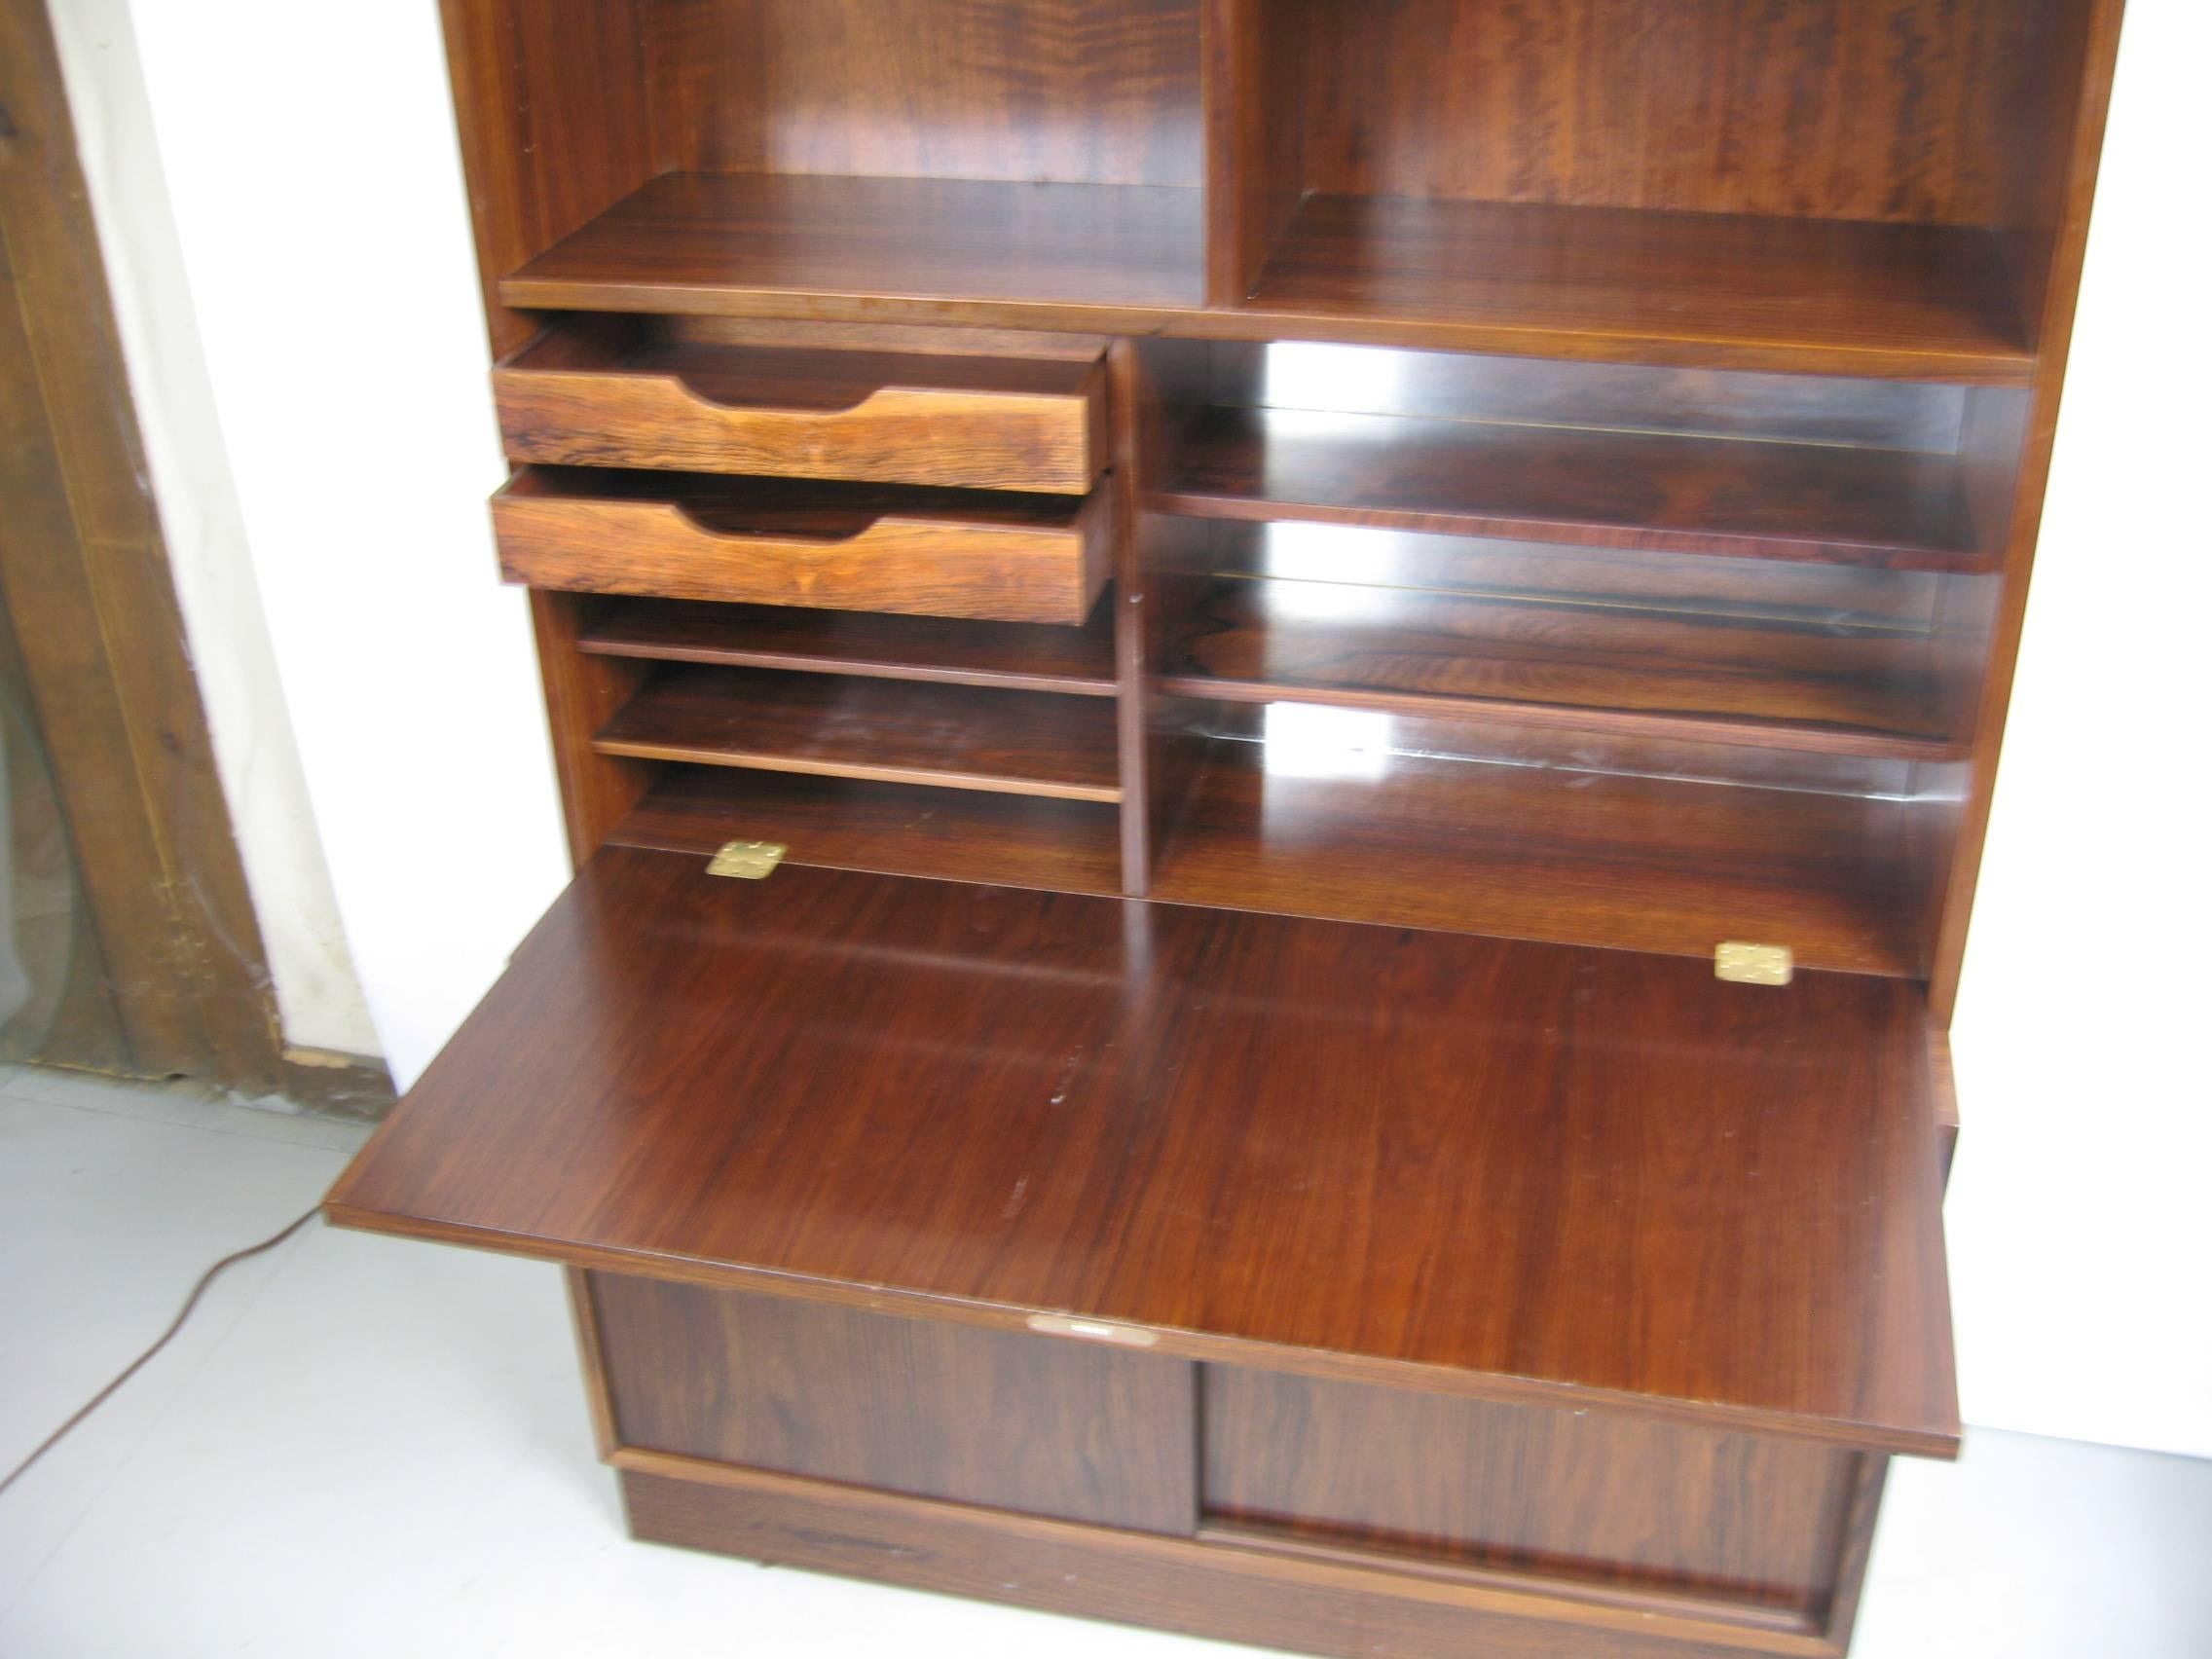 Stunning rose wood book case or desk. Sliding door on the bottom with file draw and shelving. Two pieces. Top is shelves with a locked drop down desk on the right. Measures: Top is 50.75 in x 42.5 in x 12 in deep (the top sits back), desk is 18.25